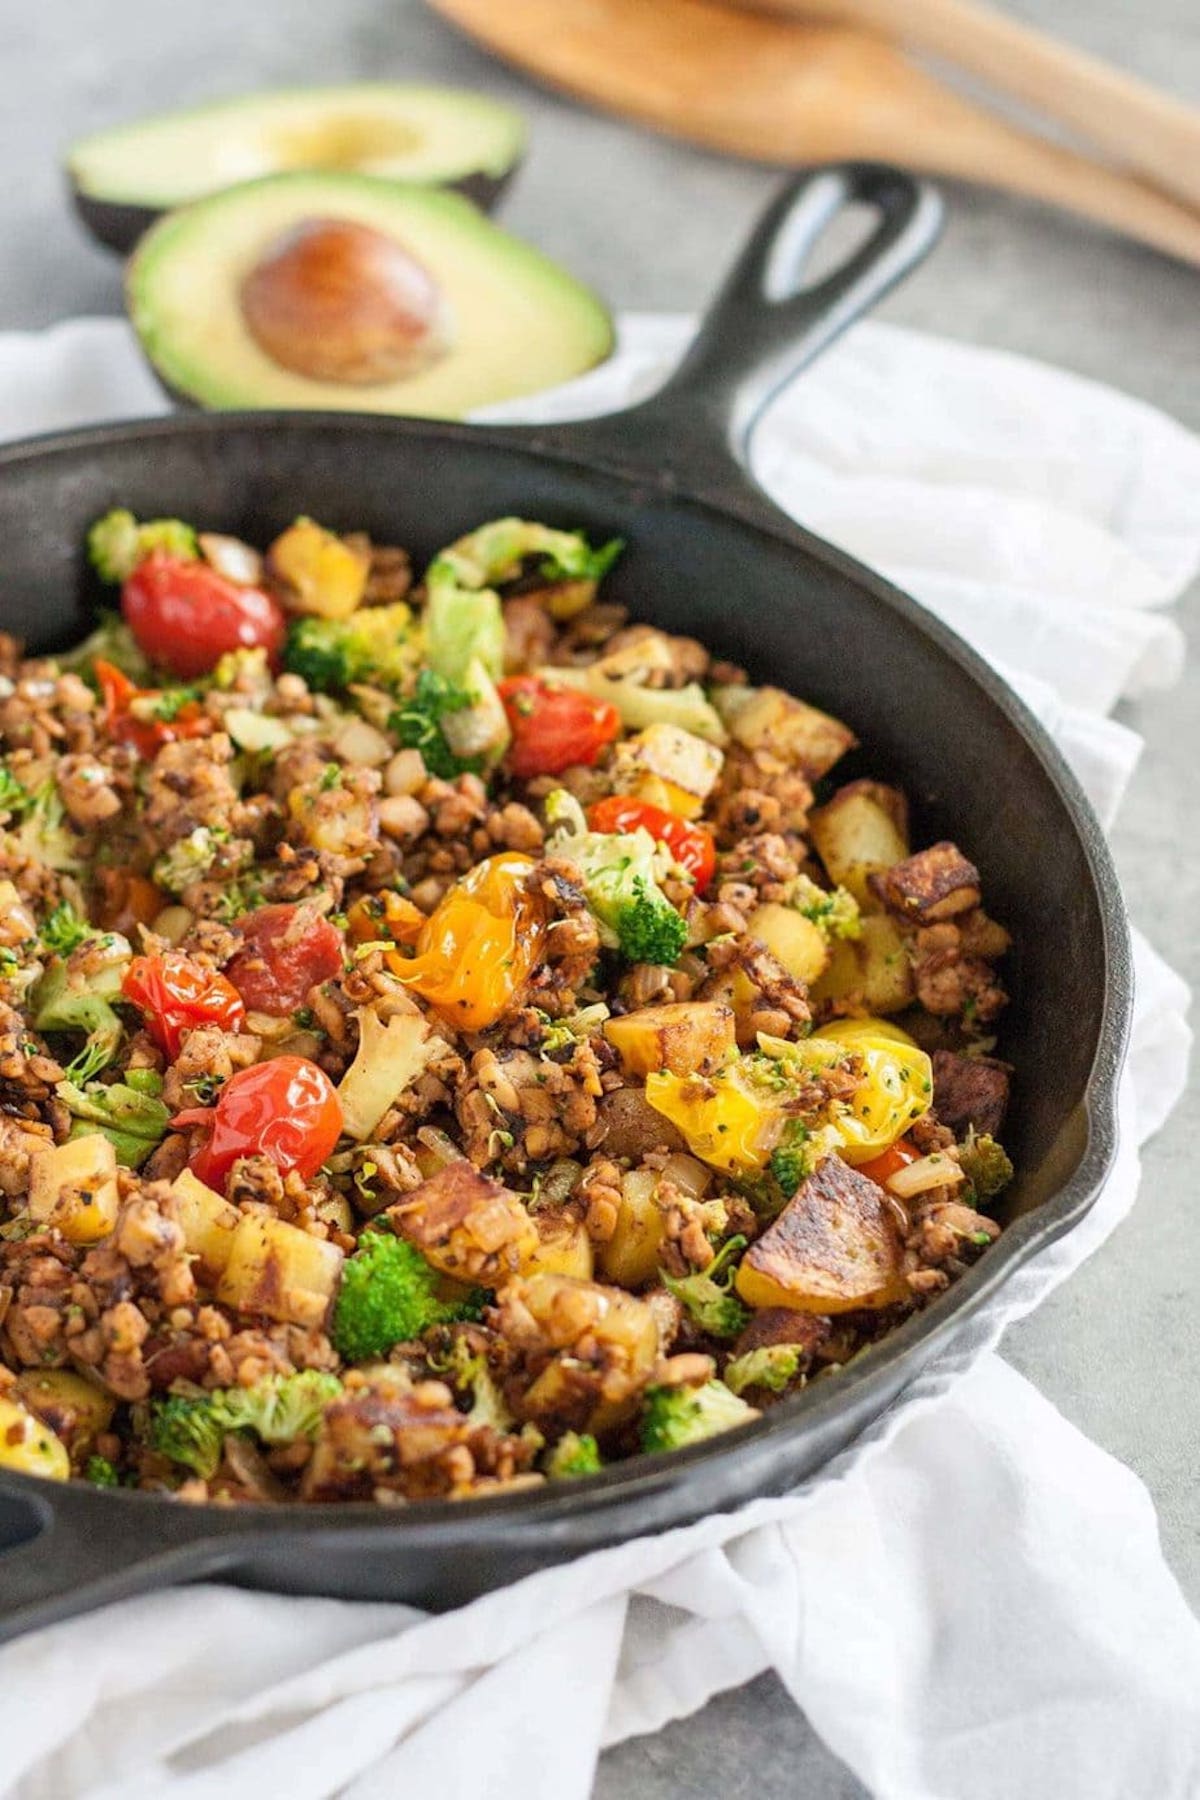 A cast iron skillet is filled with colorful tomatoes, broccoli, potatoes and tempeh